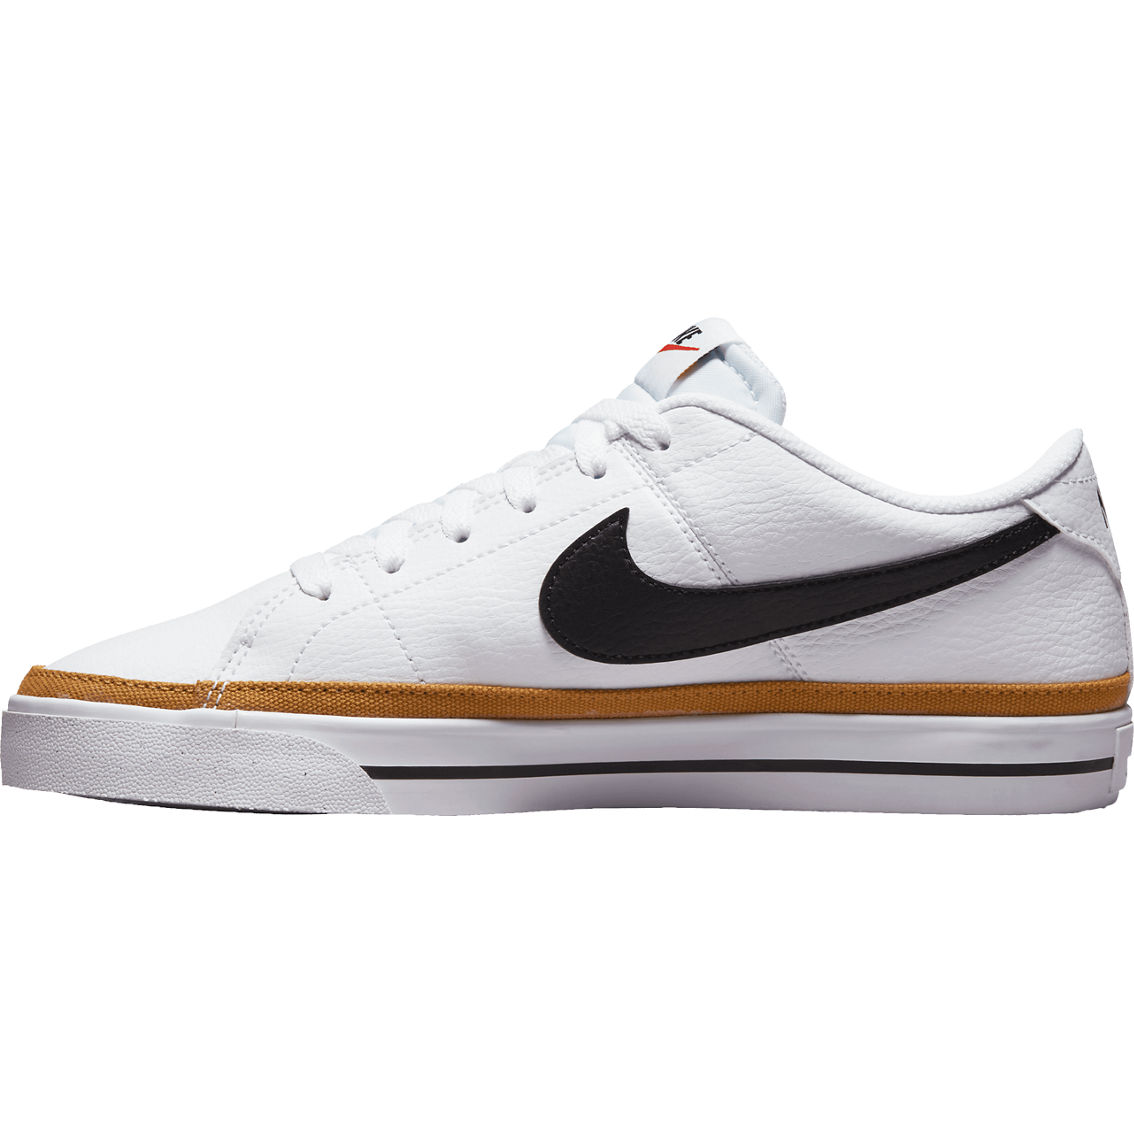 Nike Women's Court Legacy Tennis Shoes - Image 2 of 8